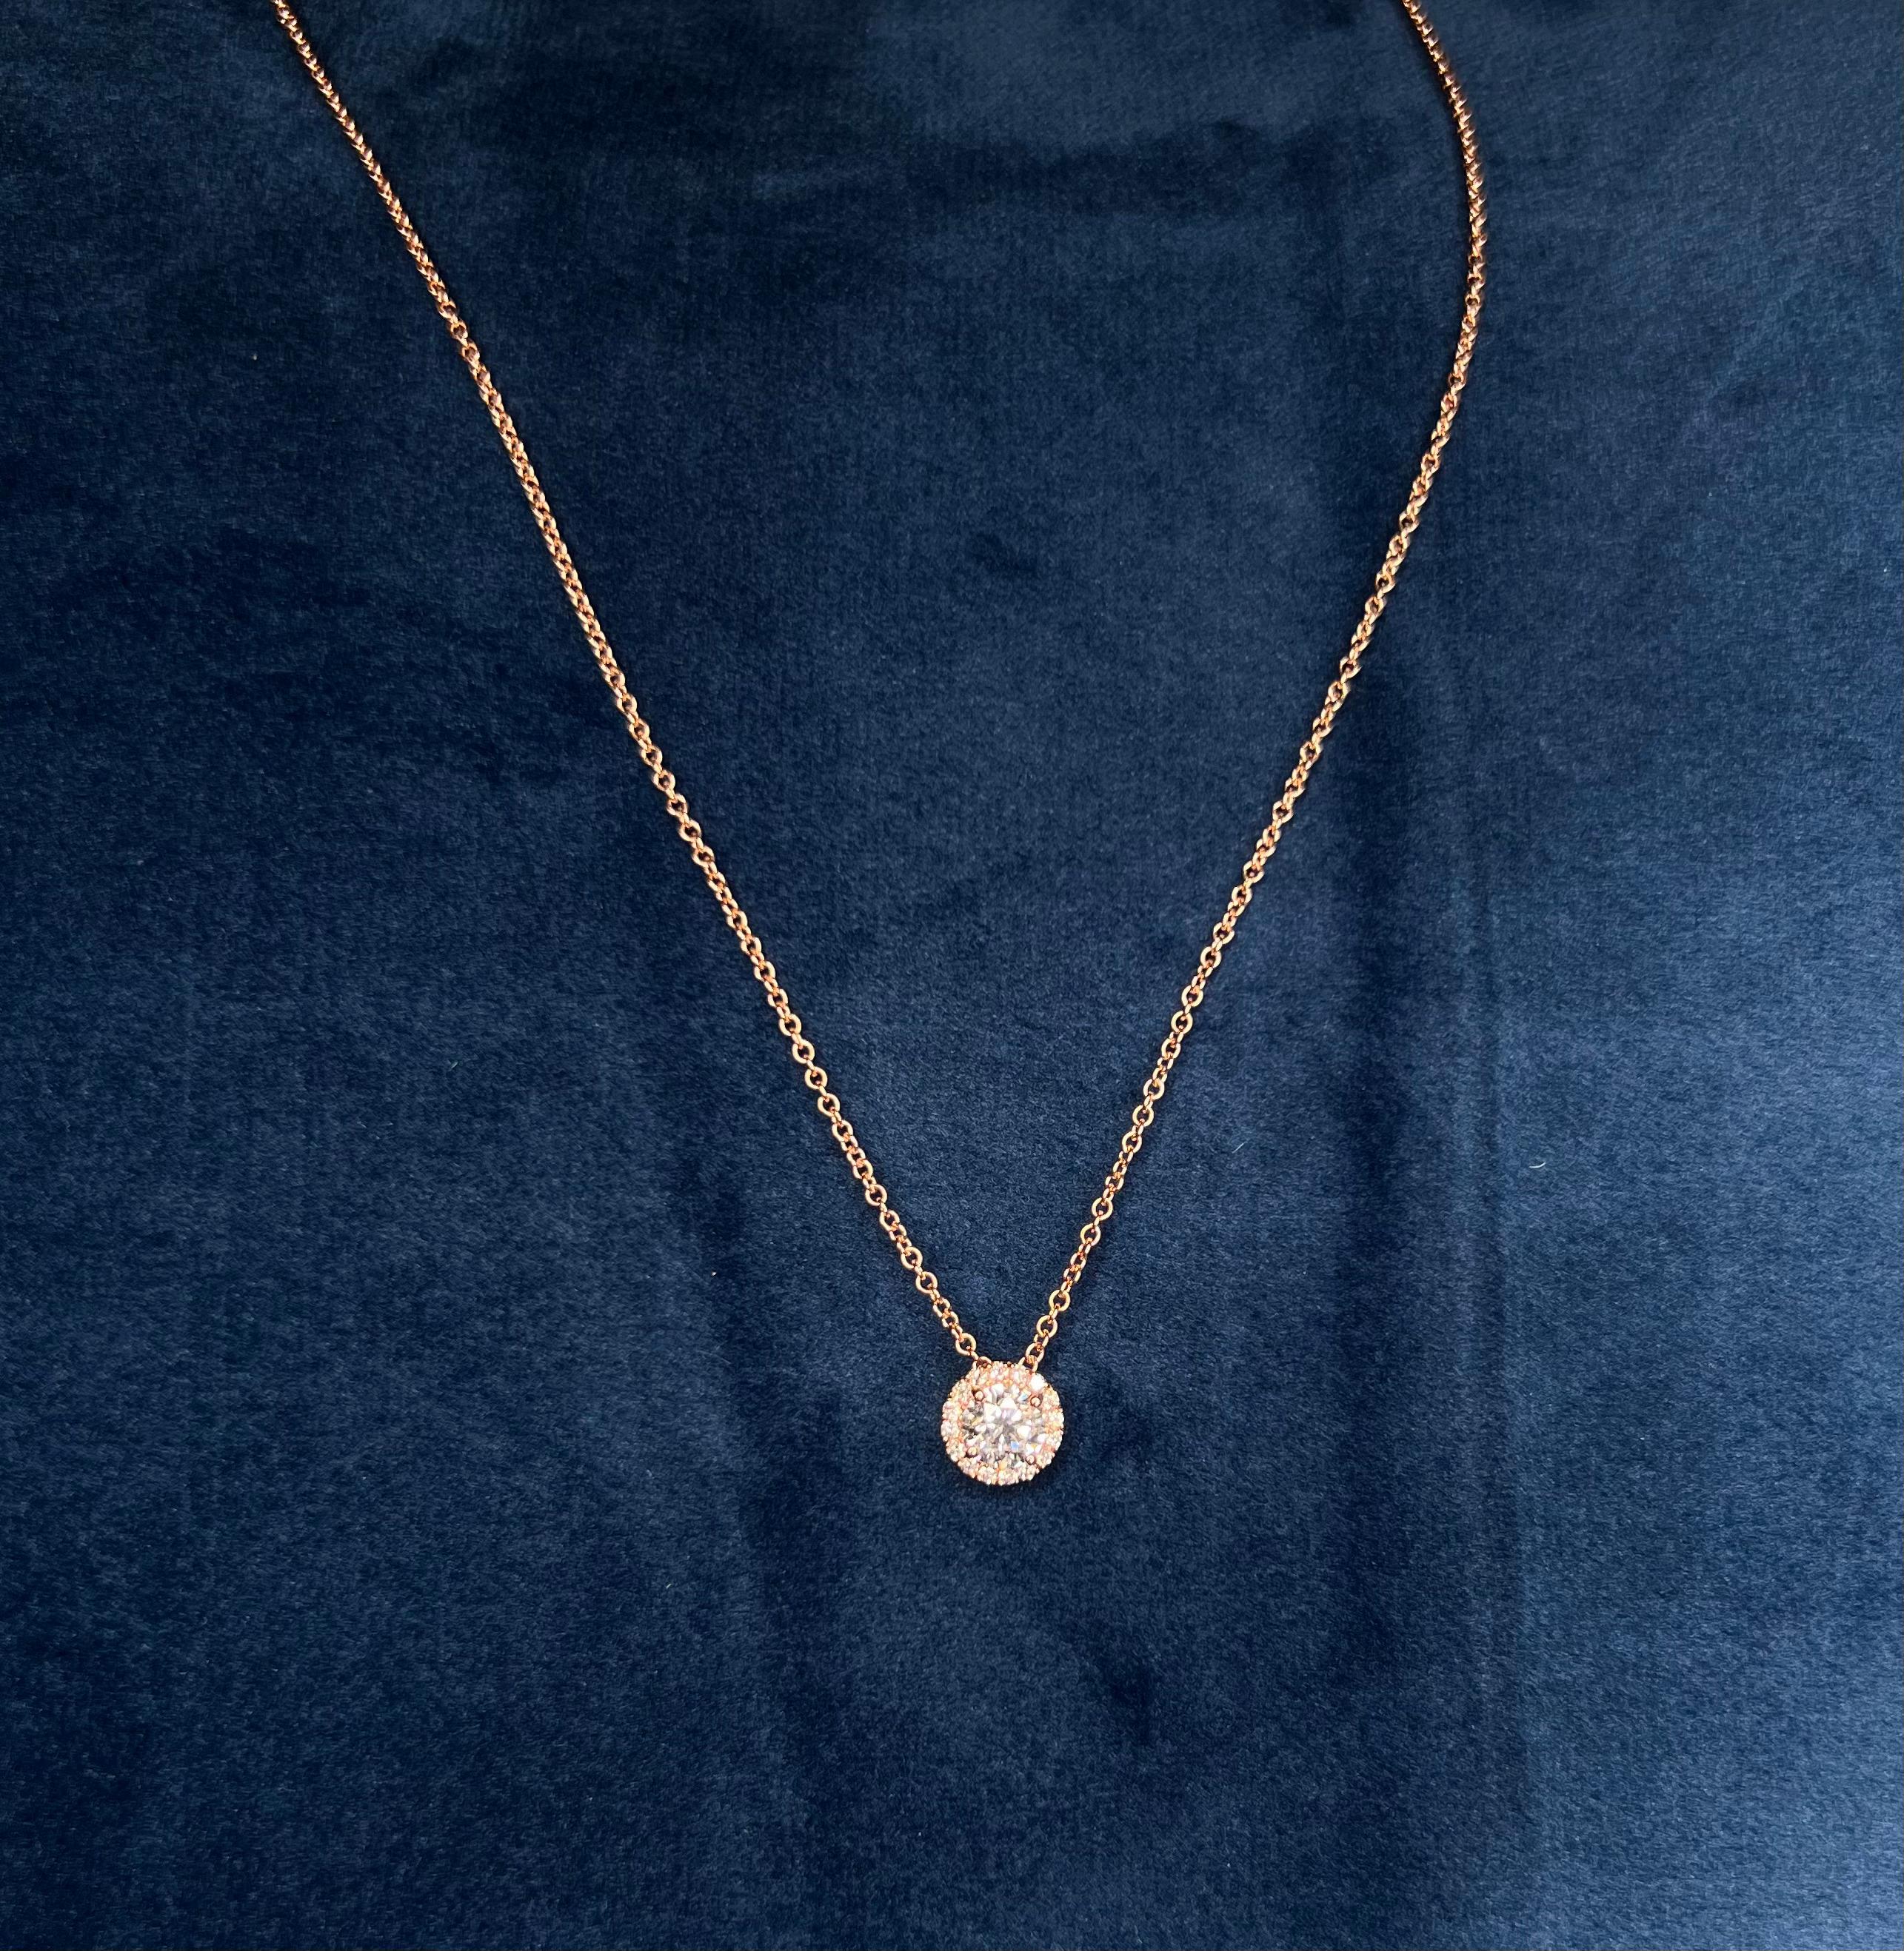 18 Inch 14k Yellow Gold 0.65 Carat Round Cut Diamond Solitaire Pendant Necklace In New Condition For Sale In Los Angeles, CA